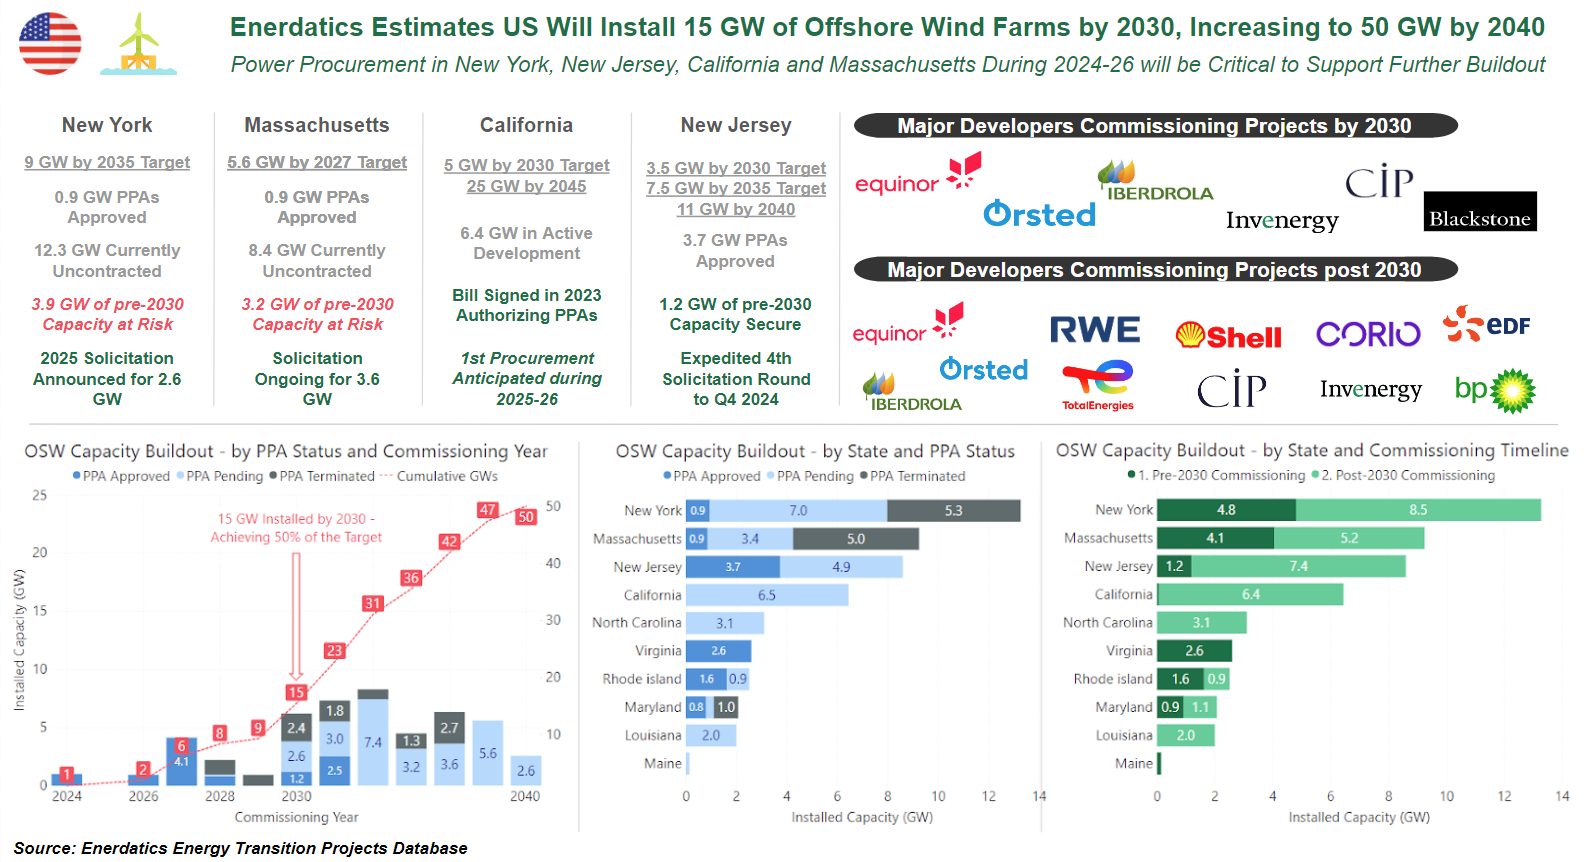 Enerdatics Forecasts US to Install 15 GW of Offshore Wind by 2030, 50 GW by 2040